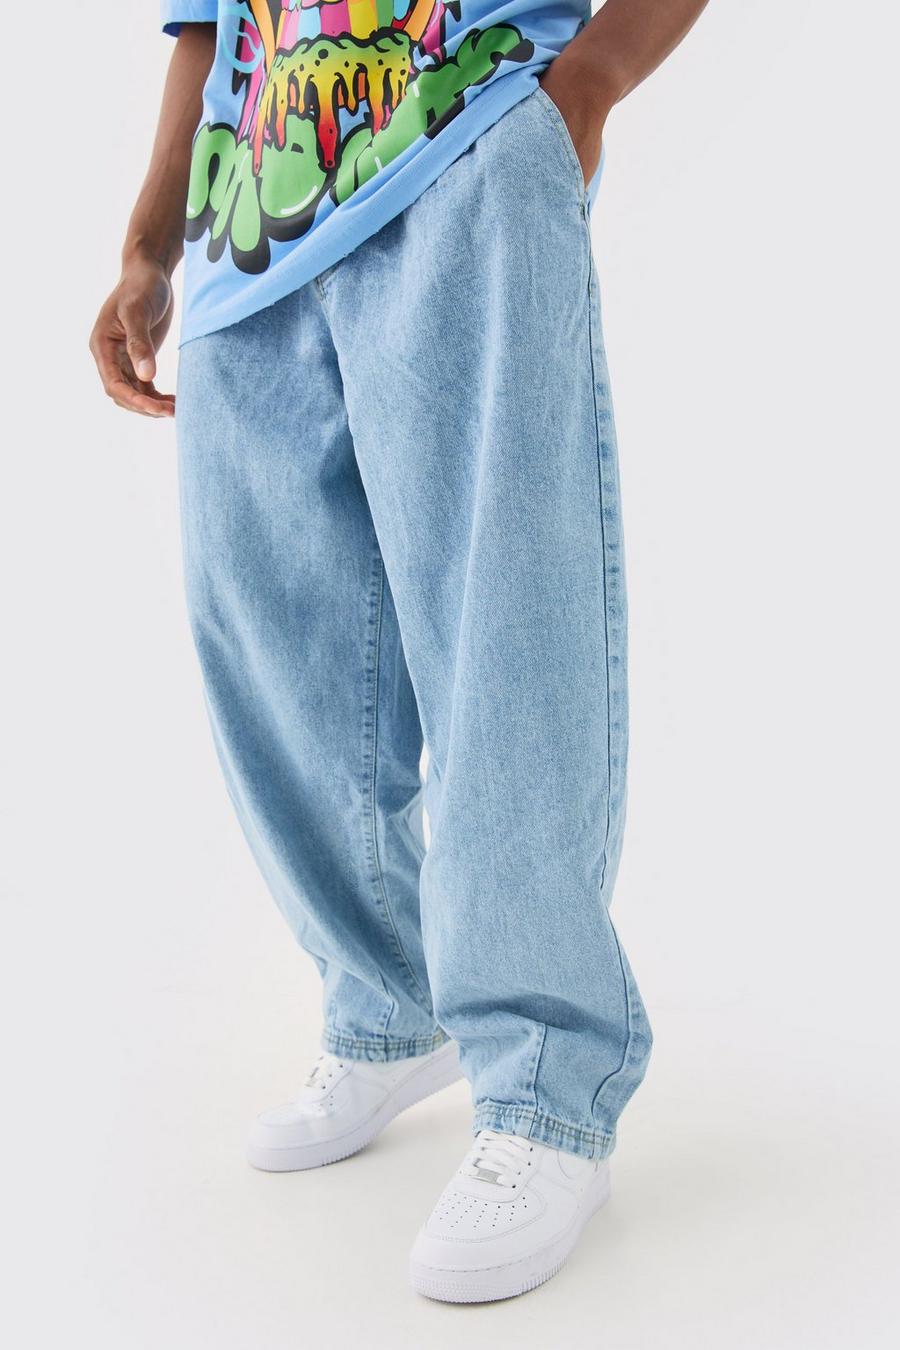 Balloon Fit Jeans In Ice Blue